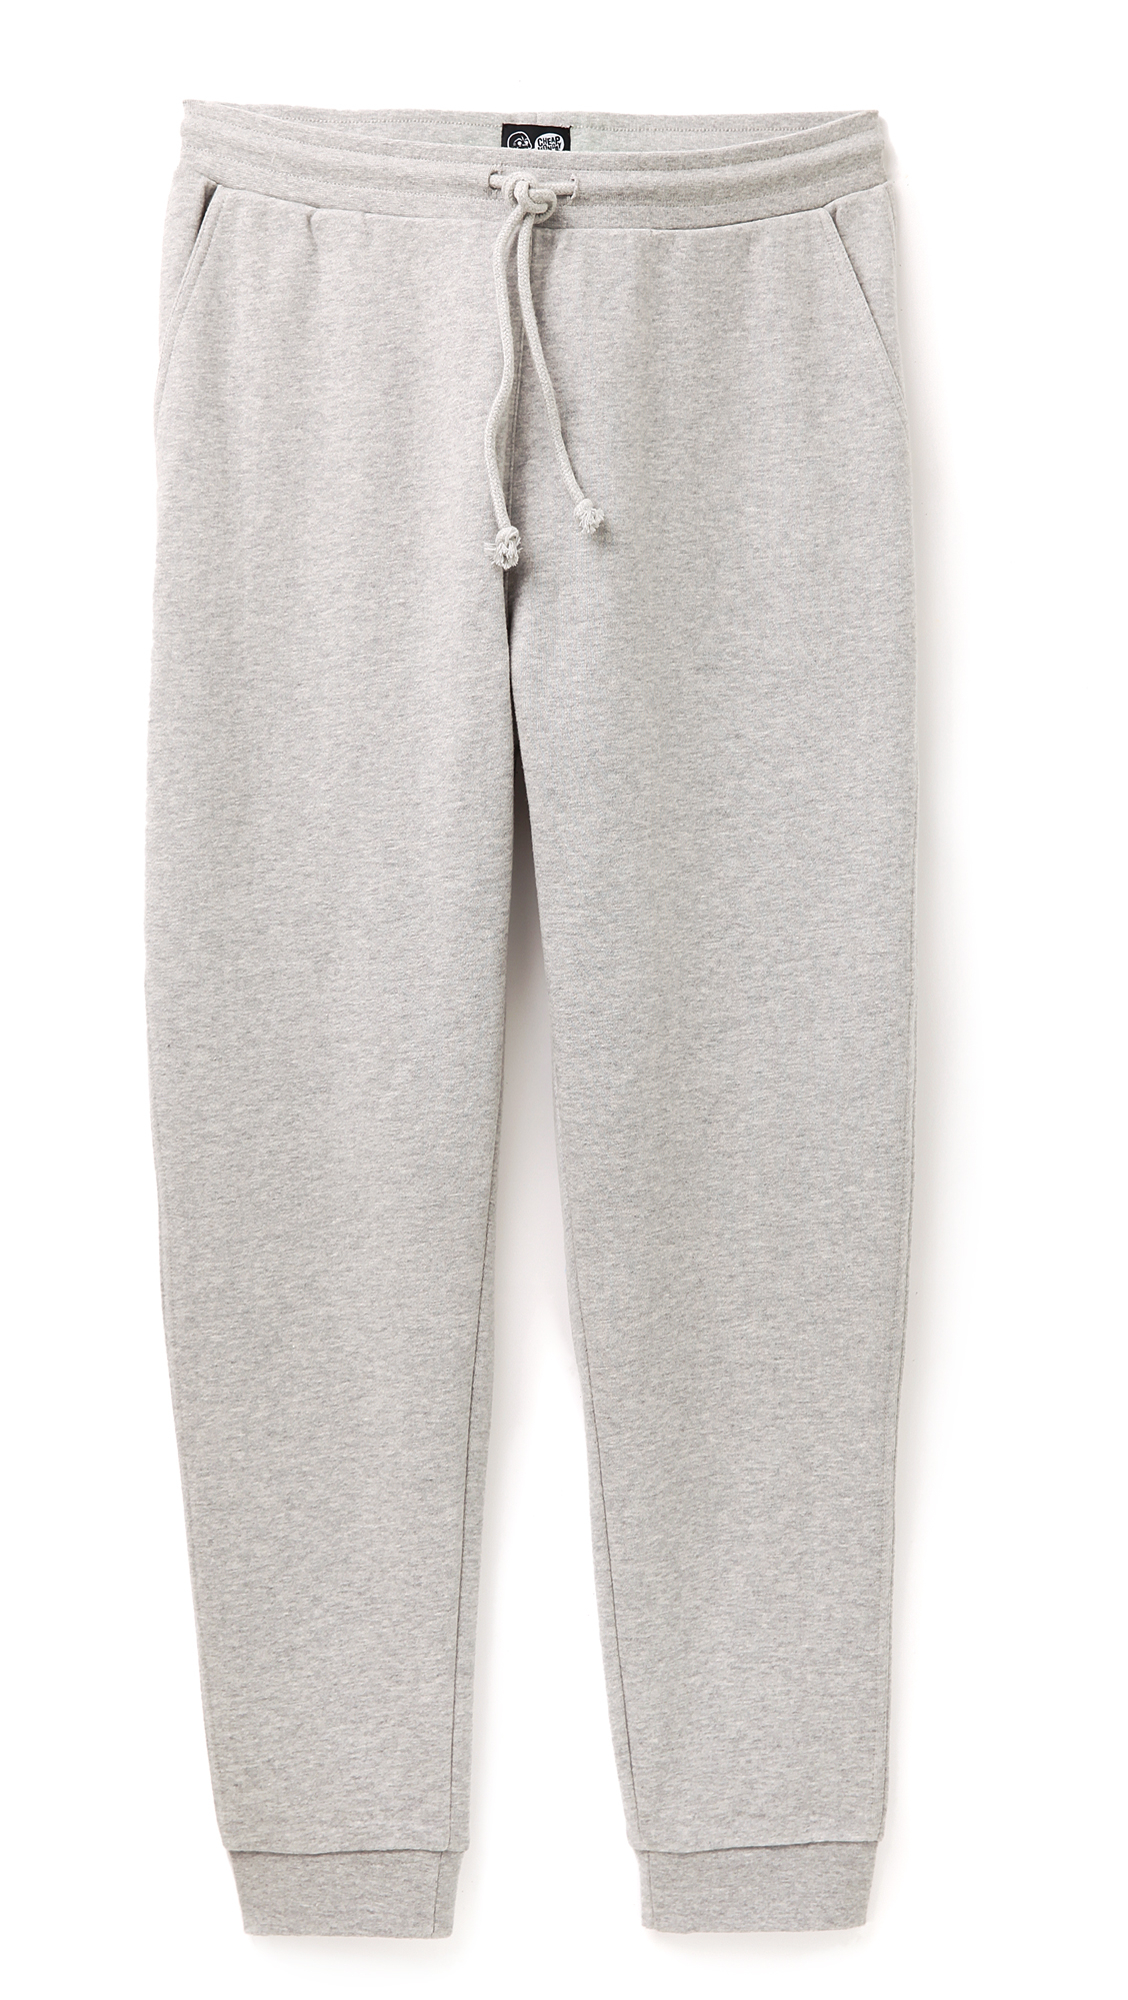 Lyst - Cheap Monday Tell Sweatpants in Gray for Men